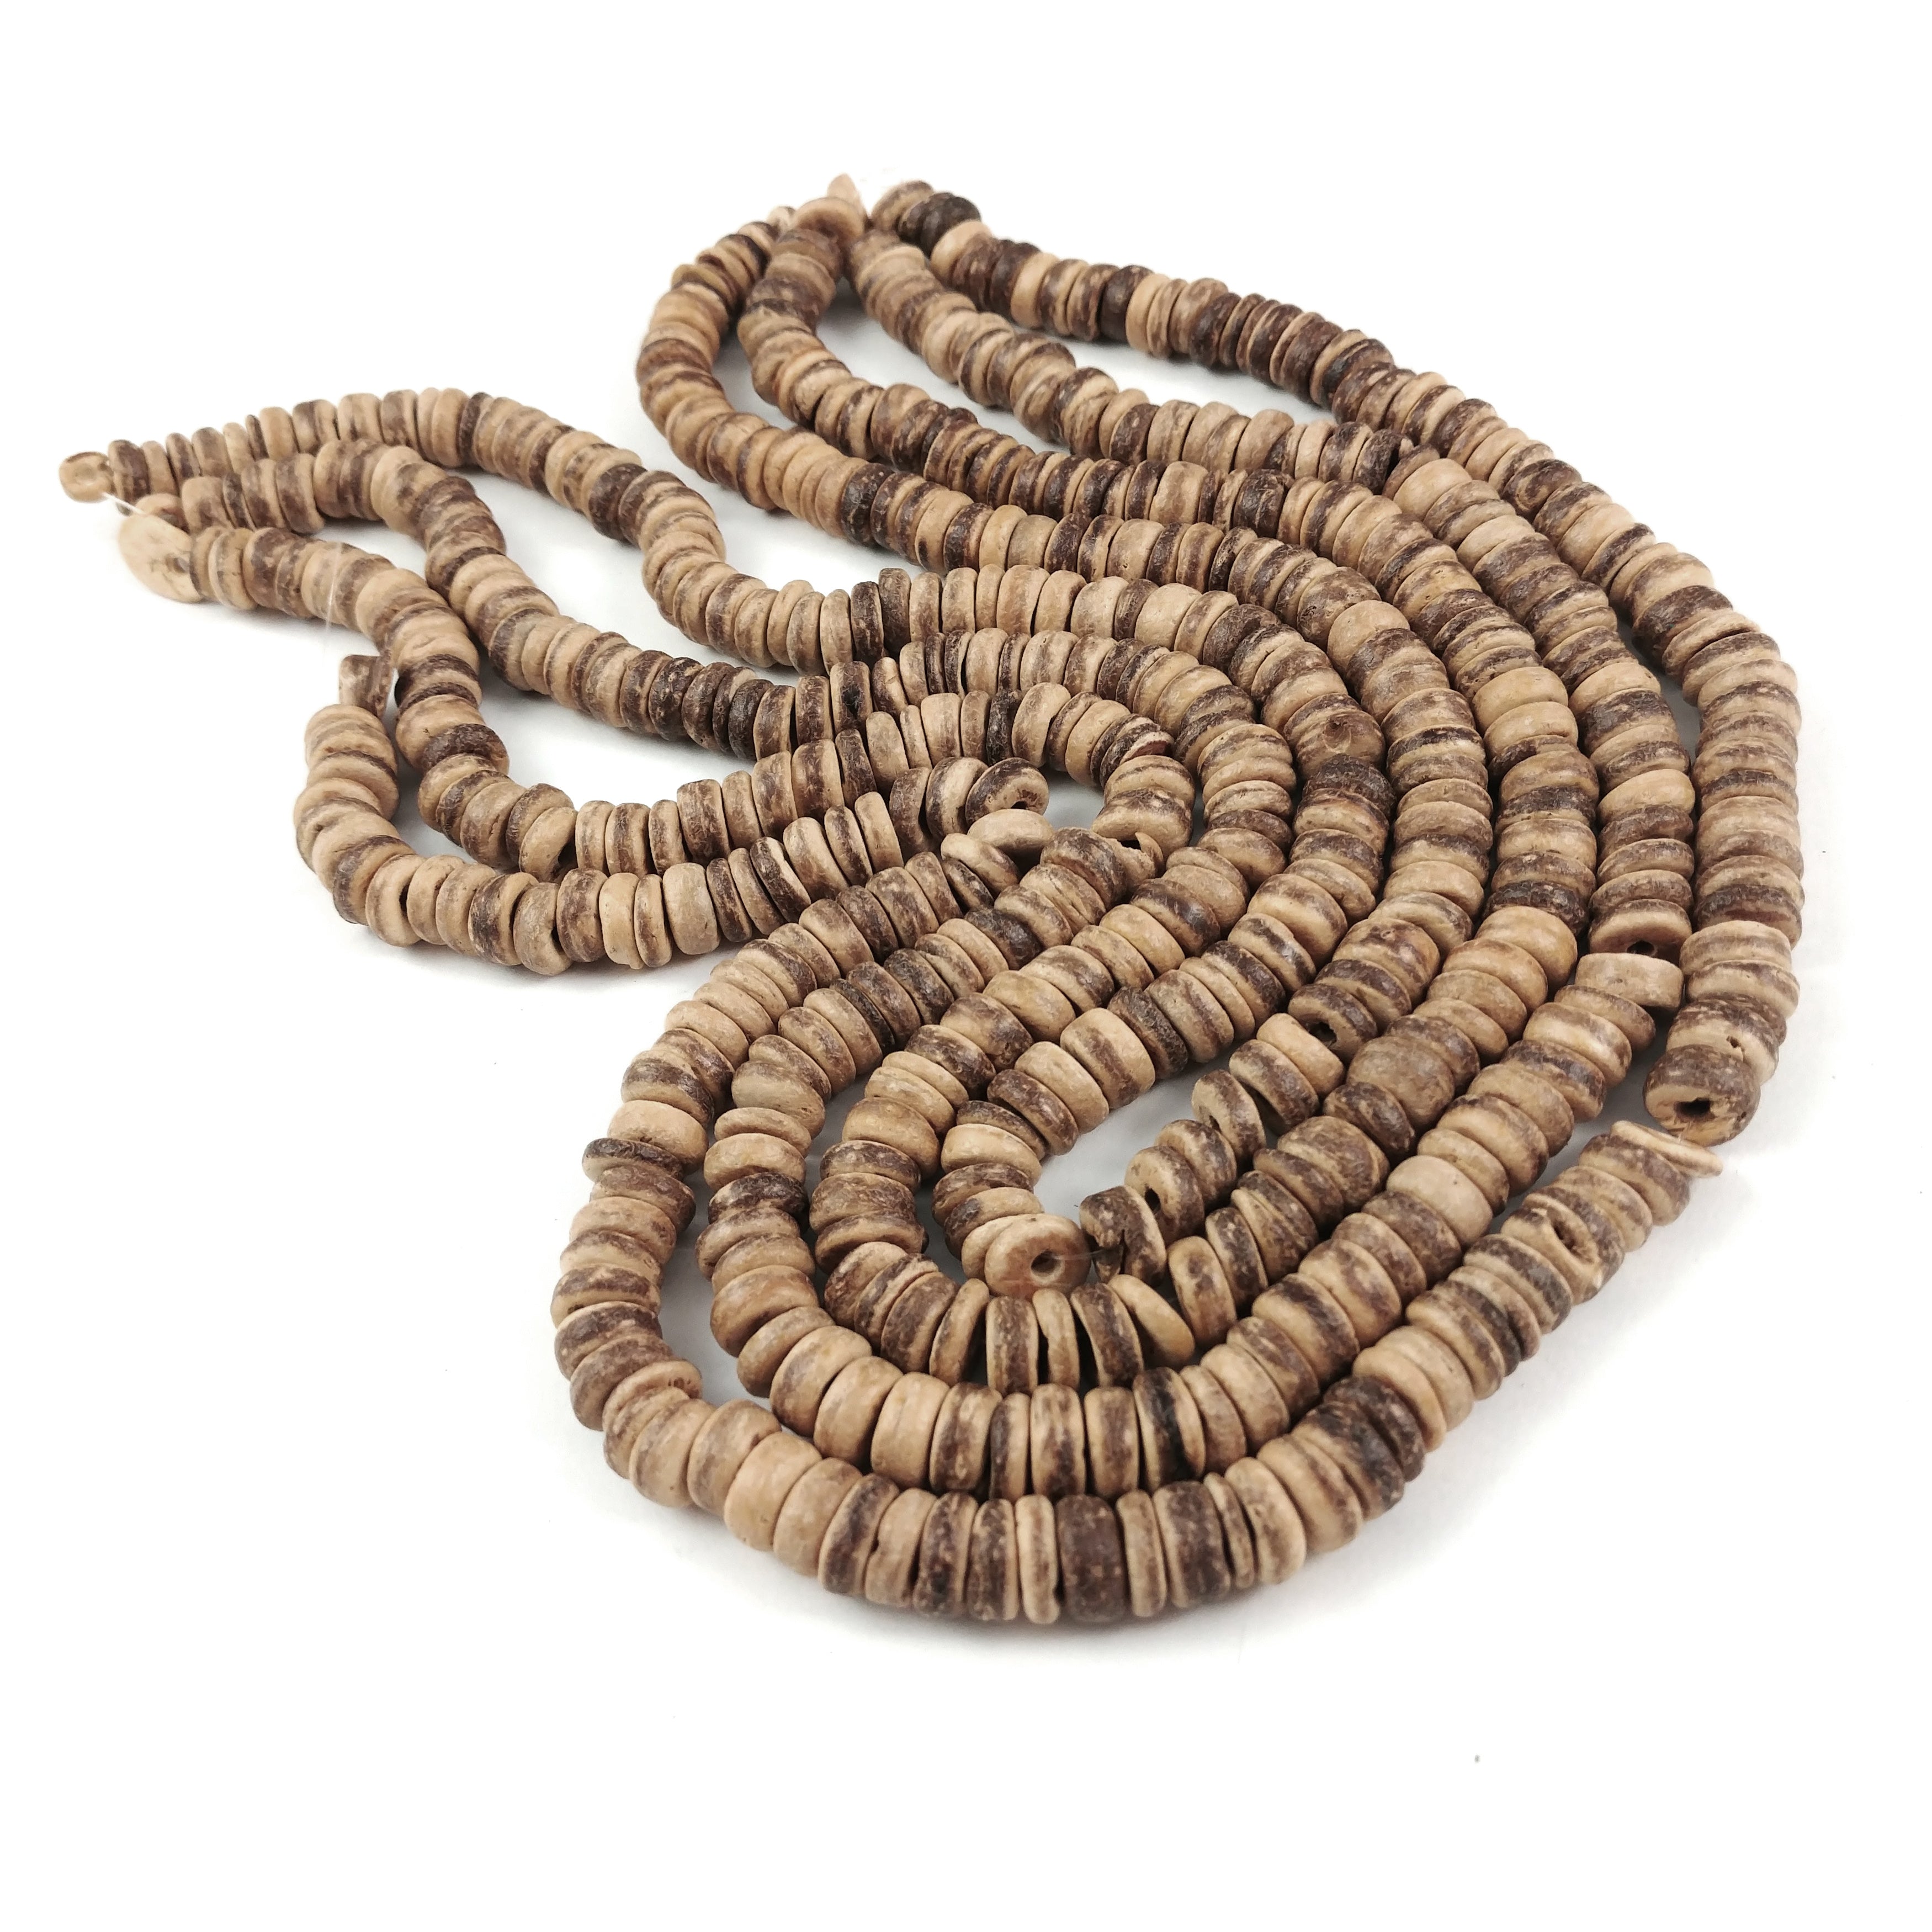 Natural Coco wood Beads - Eco Friendly Donuts Rondelle Disk Beads 8mm - 100pcs